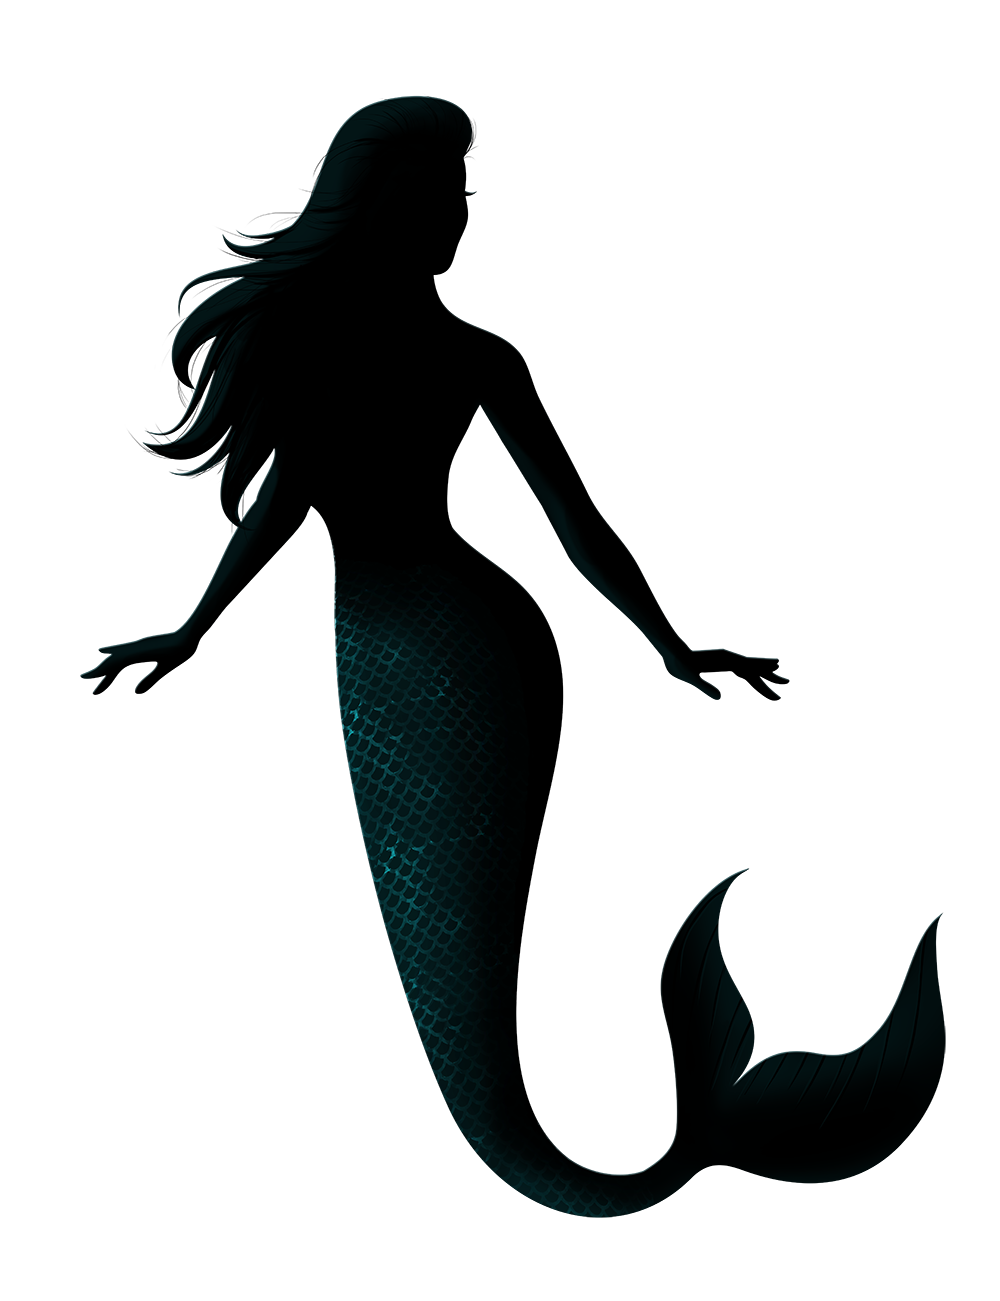 Mermaid Png Transparent Image Download Size 1000x1301px